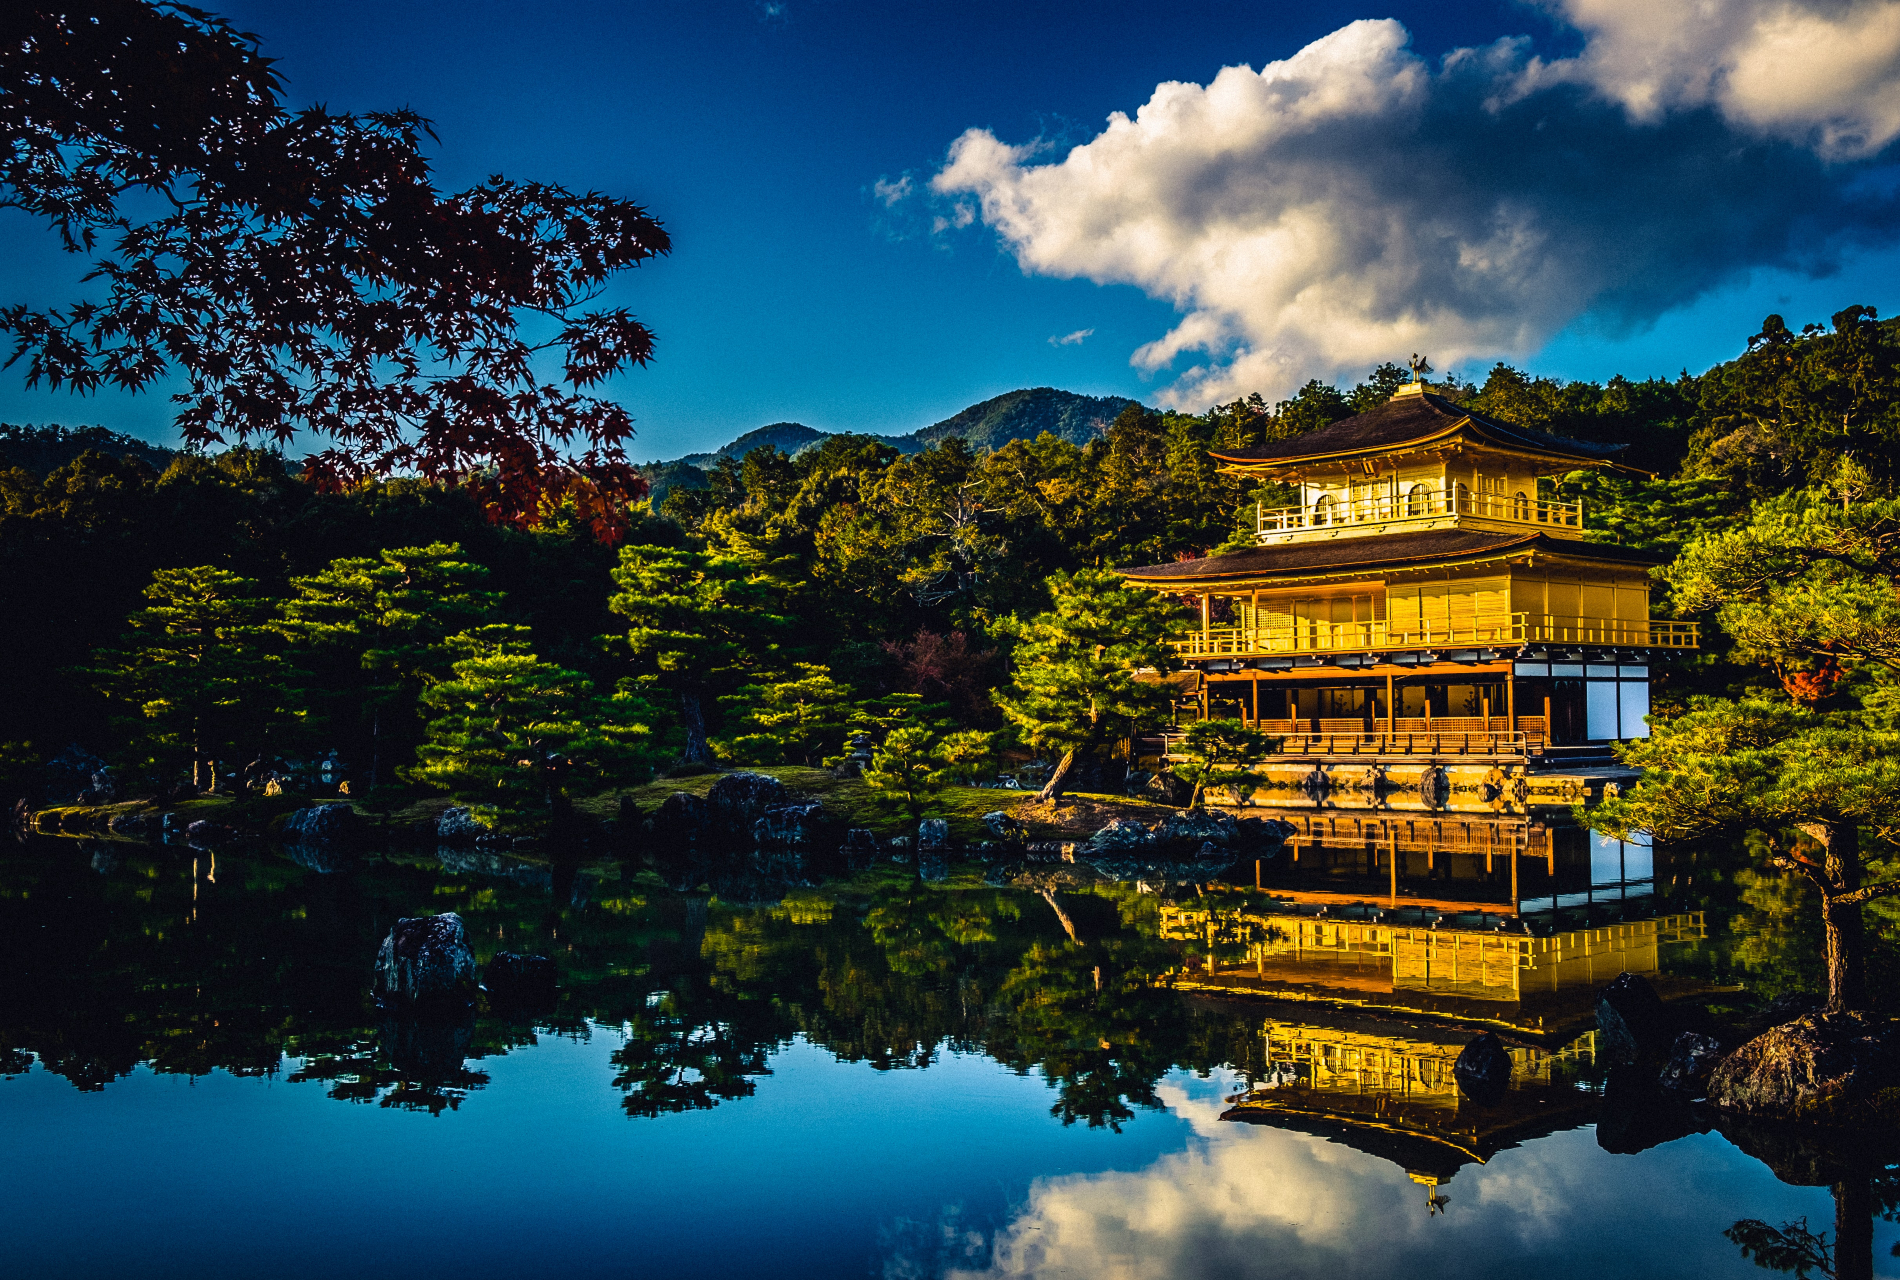 Image of Kyoto with one of its shrines facing nature